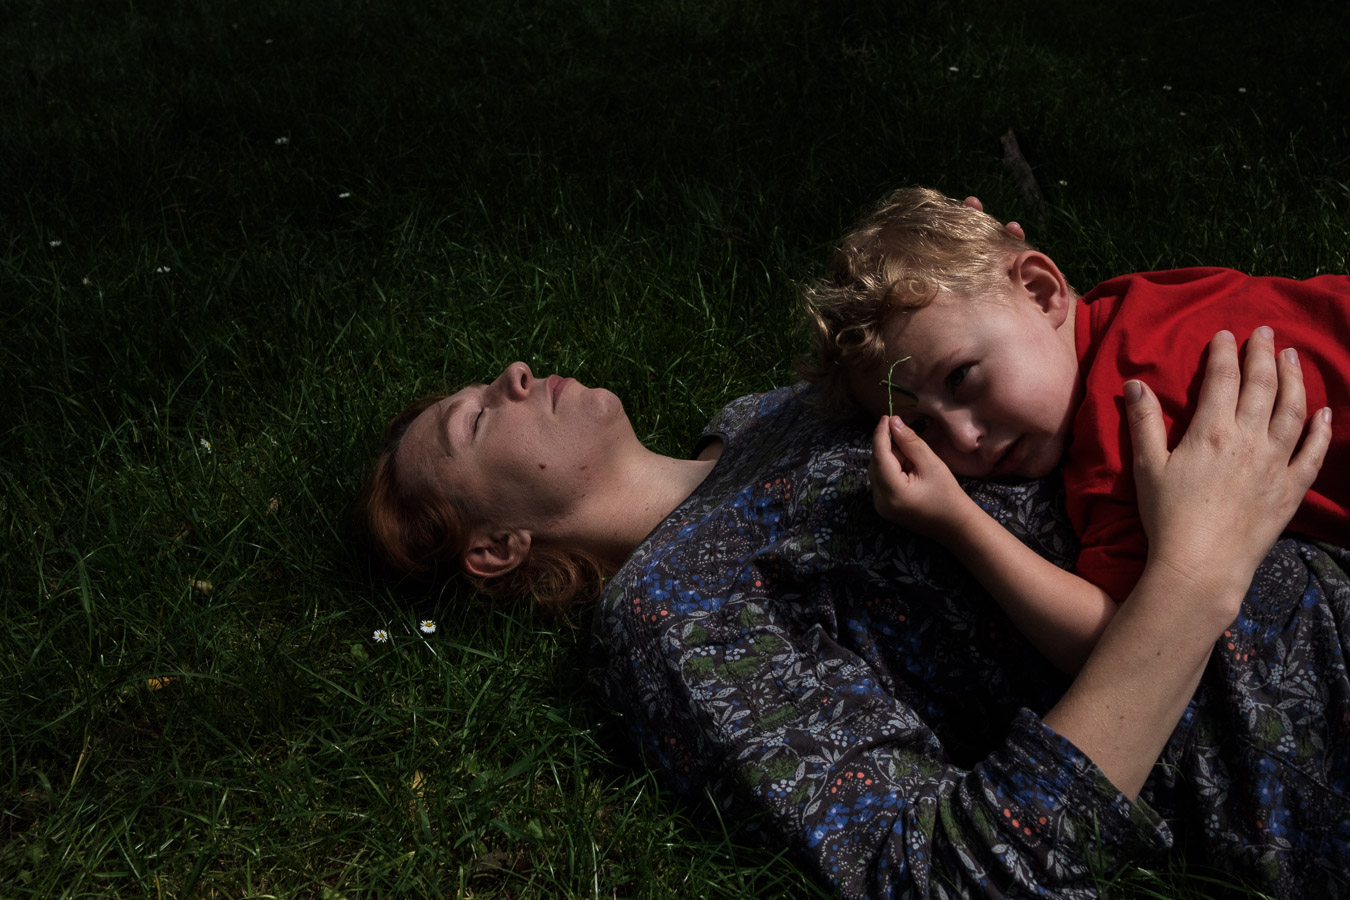 Mother and child resting together in a beautiful moment together in a grassy field.